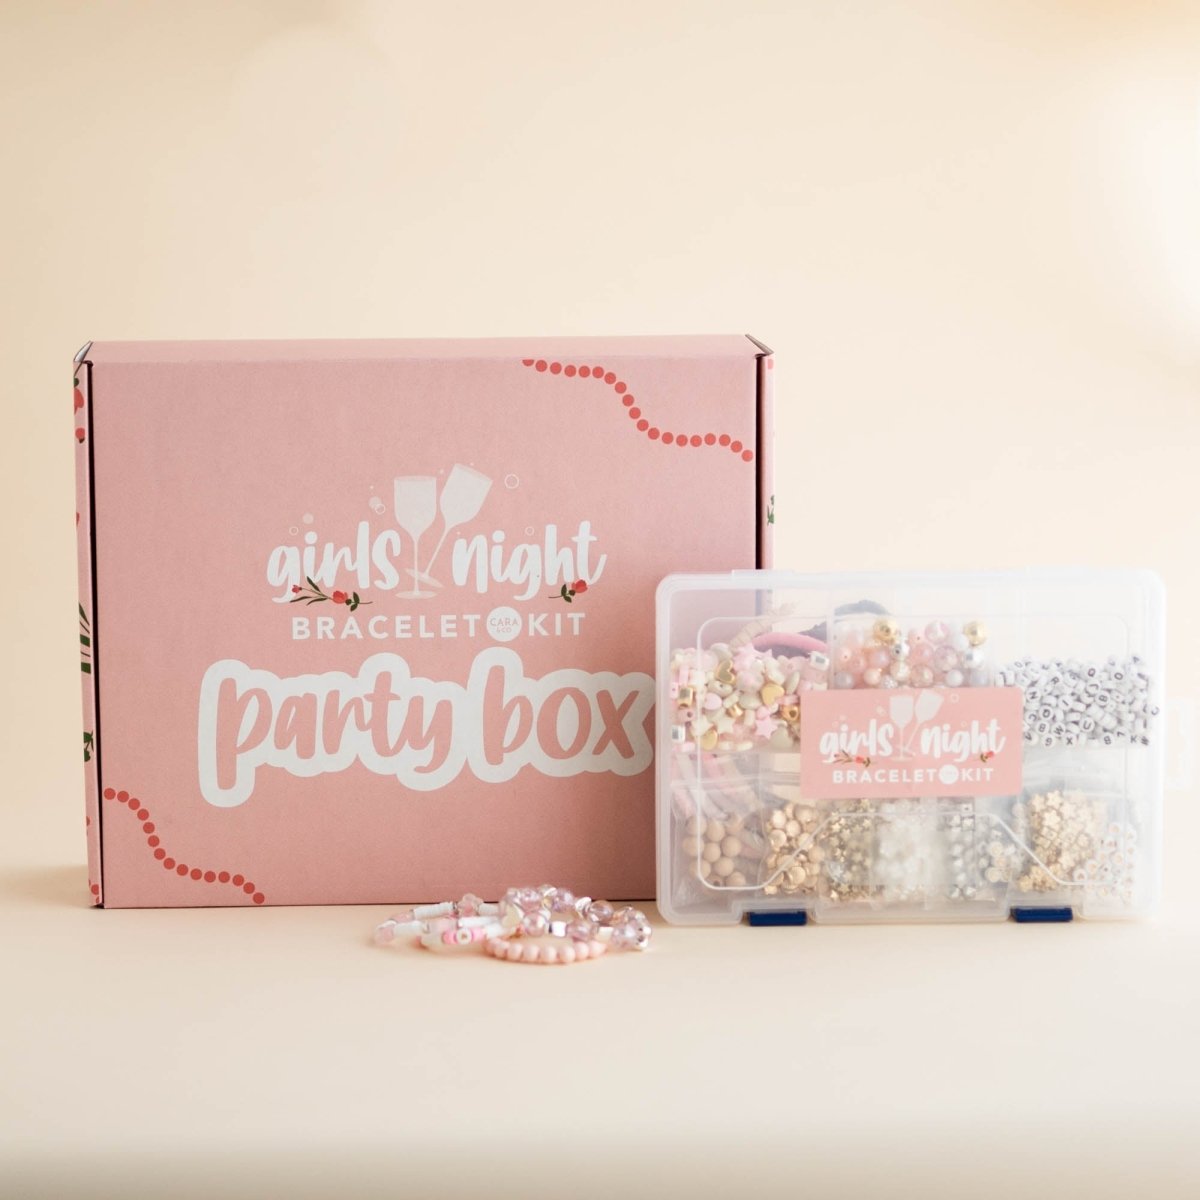 Party Boxes Party Box Girls Night Bracelet Kit from Cara & Co Craft Supply